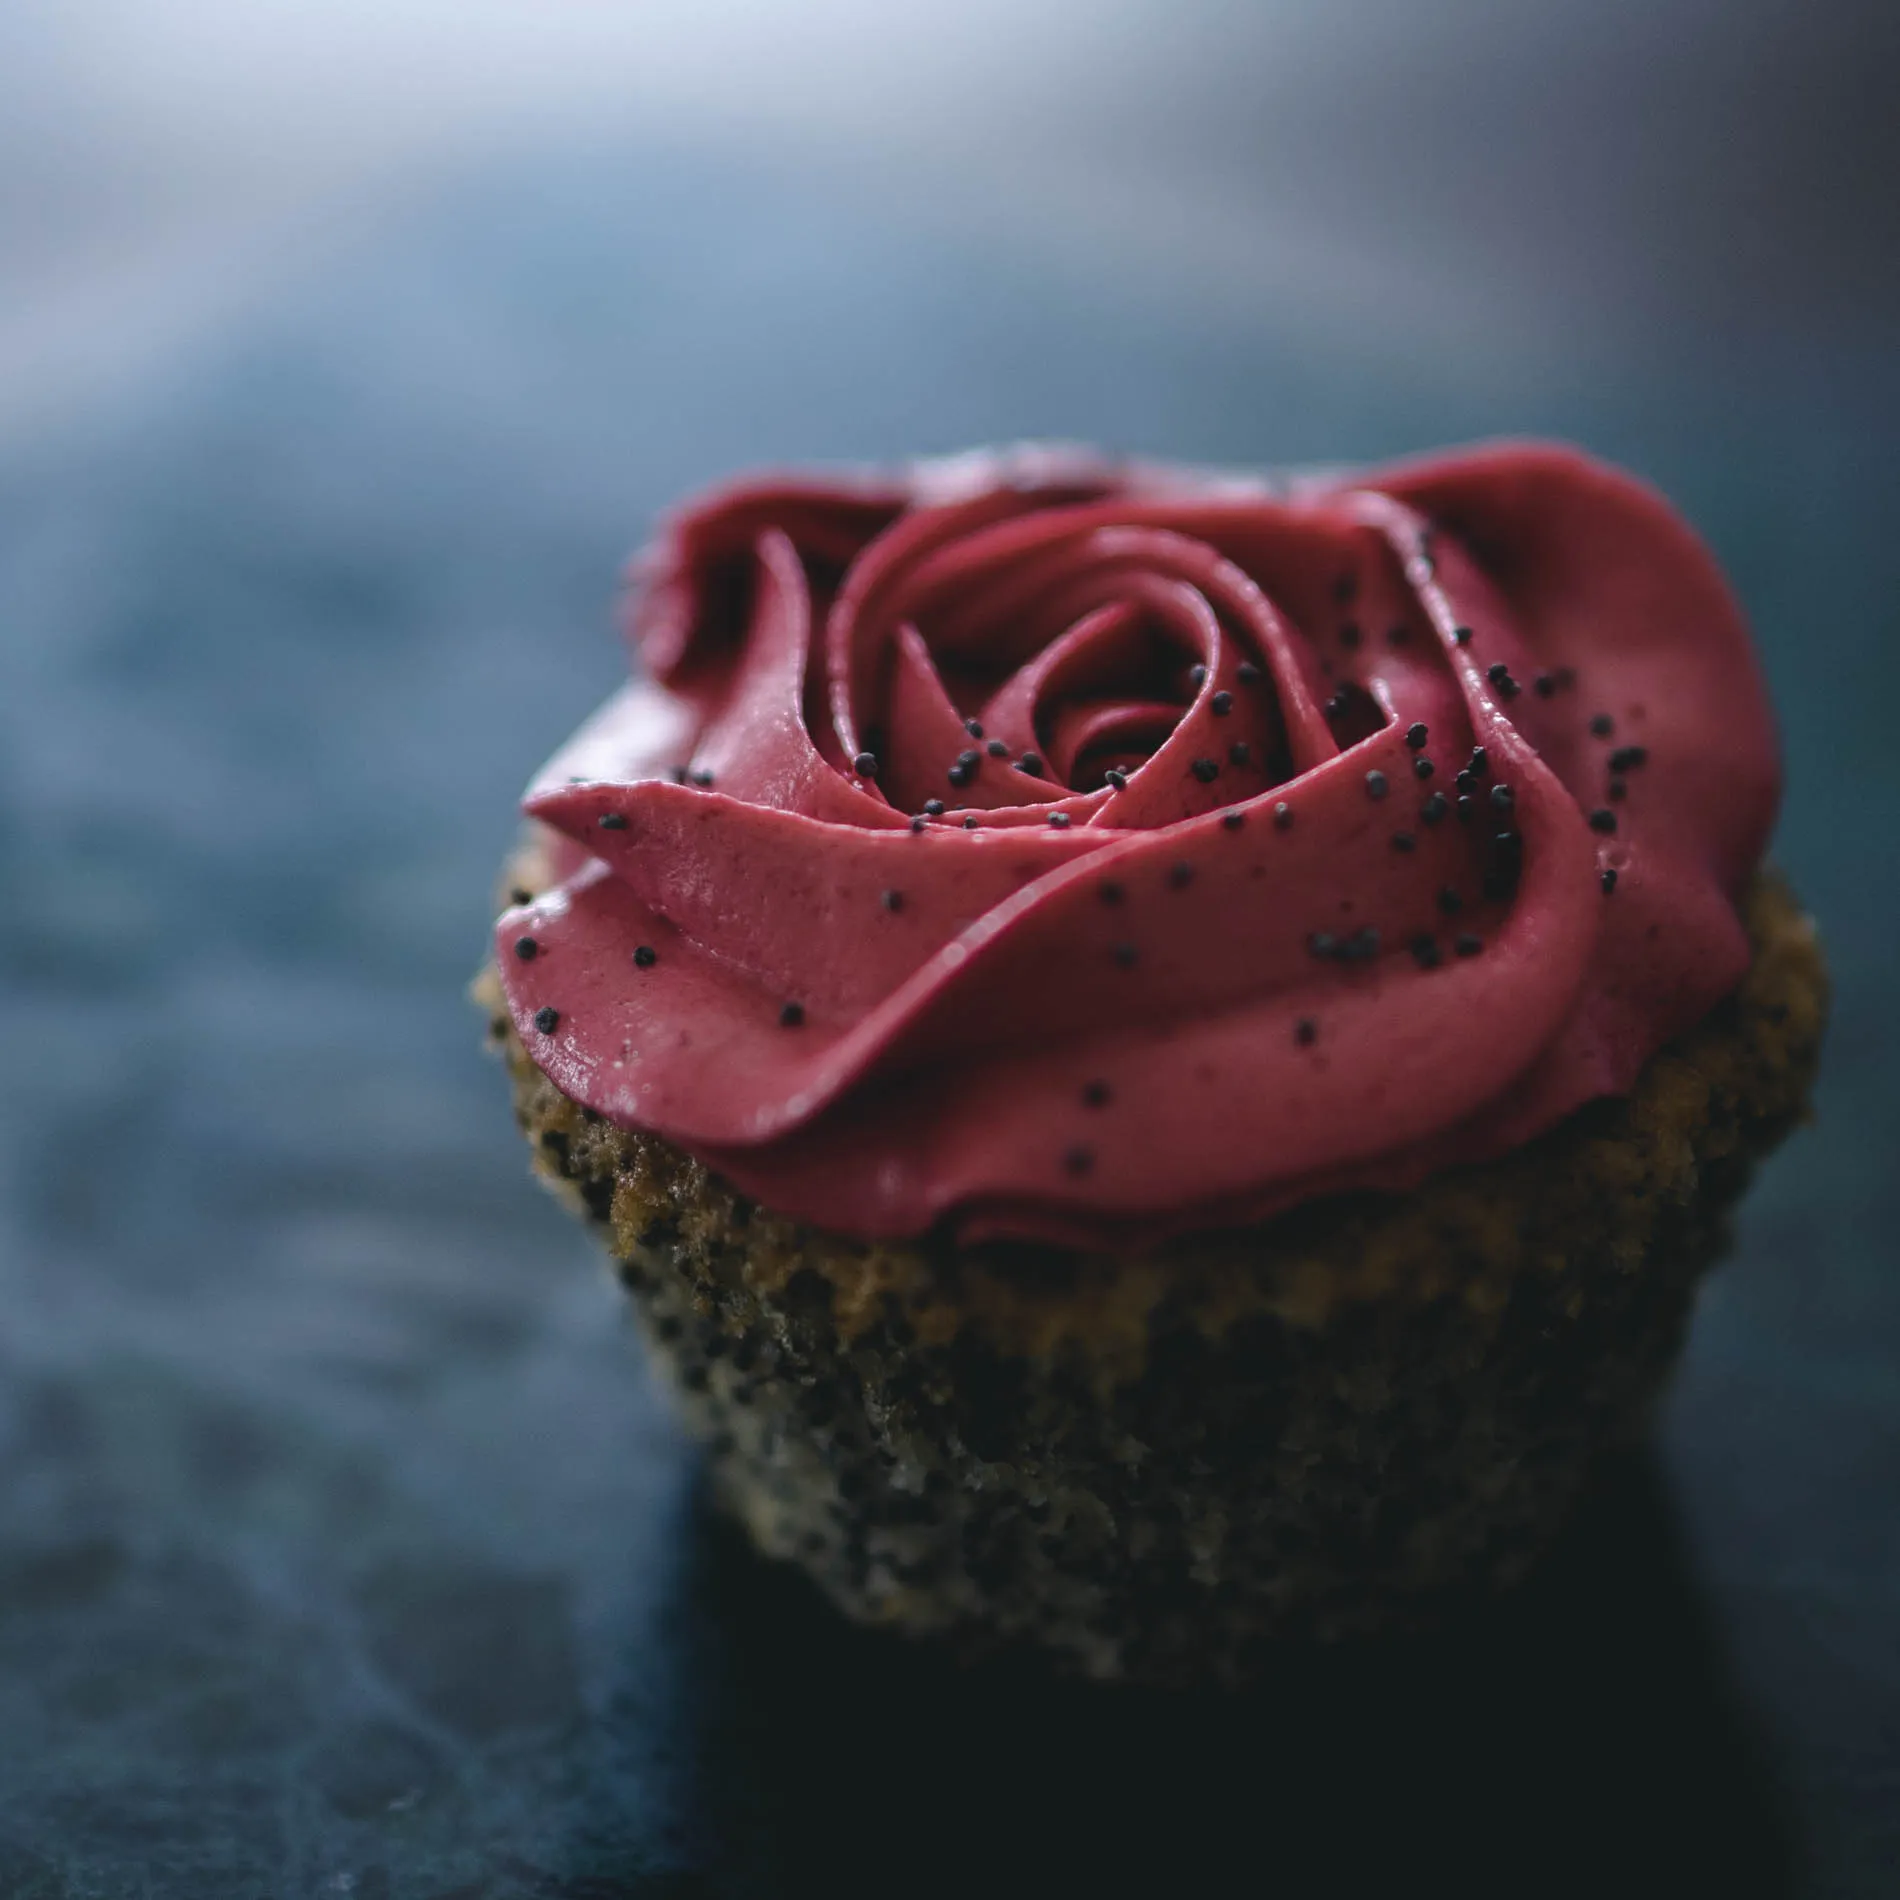 Poppy Seed Cupcake with Raspberry Frosting